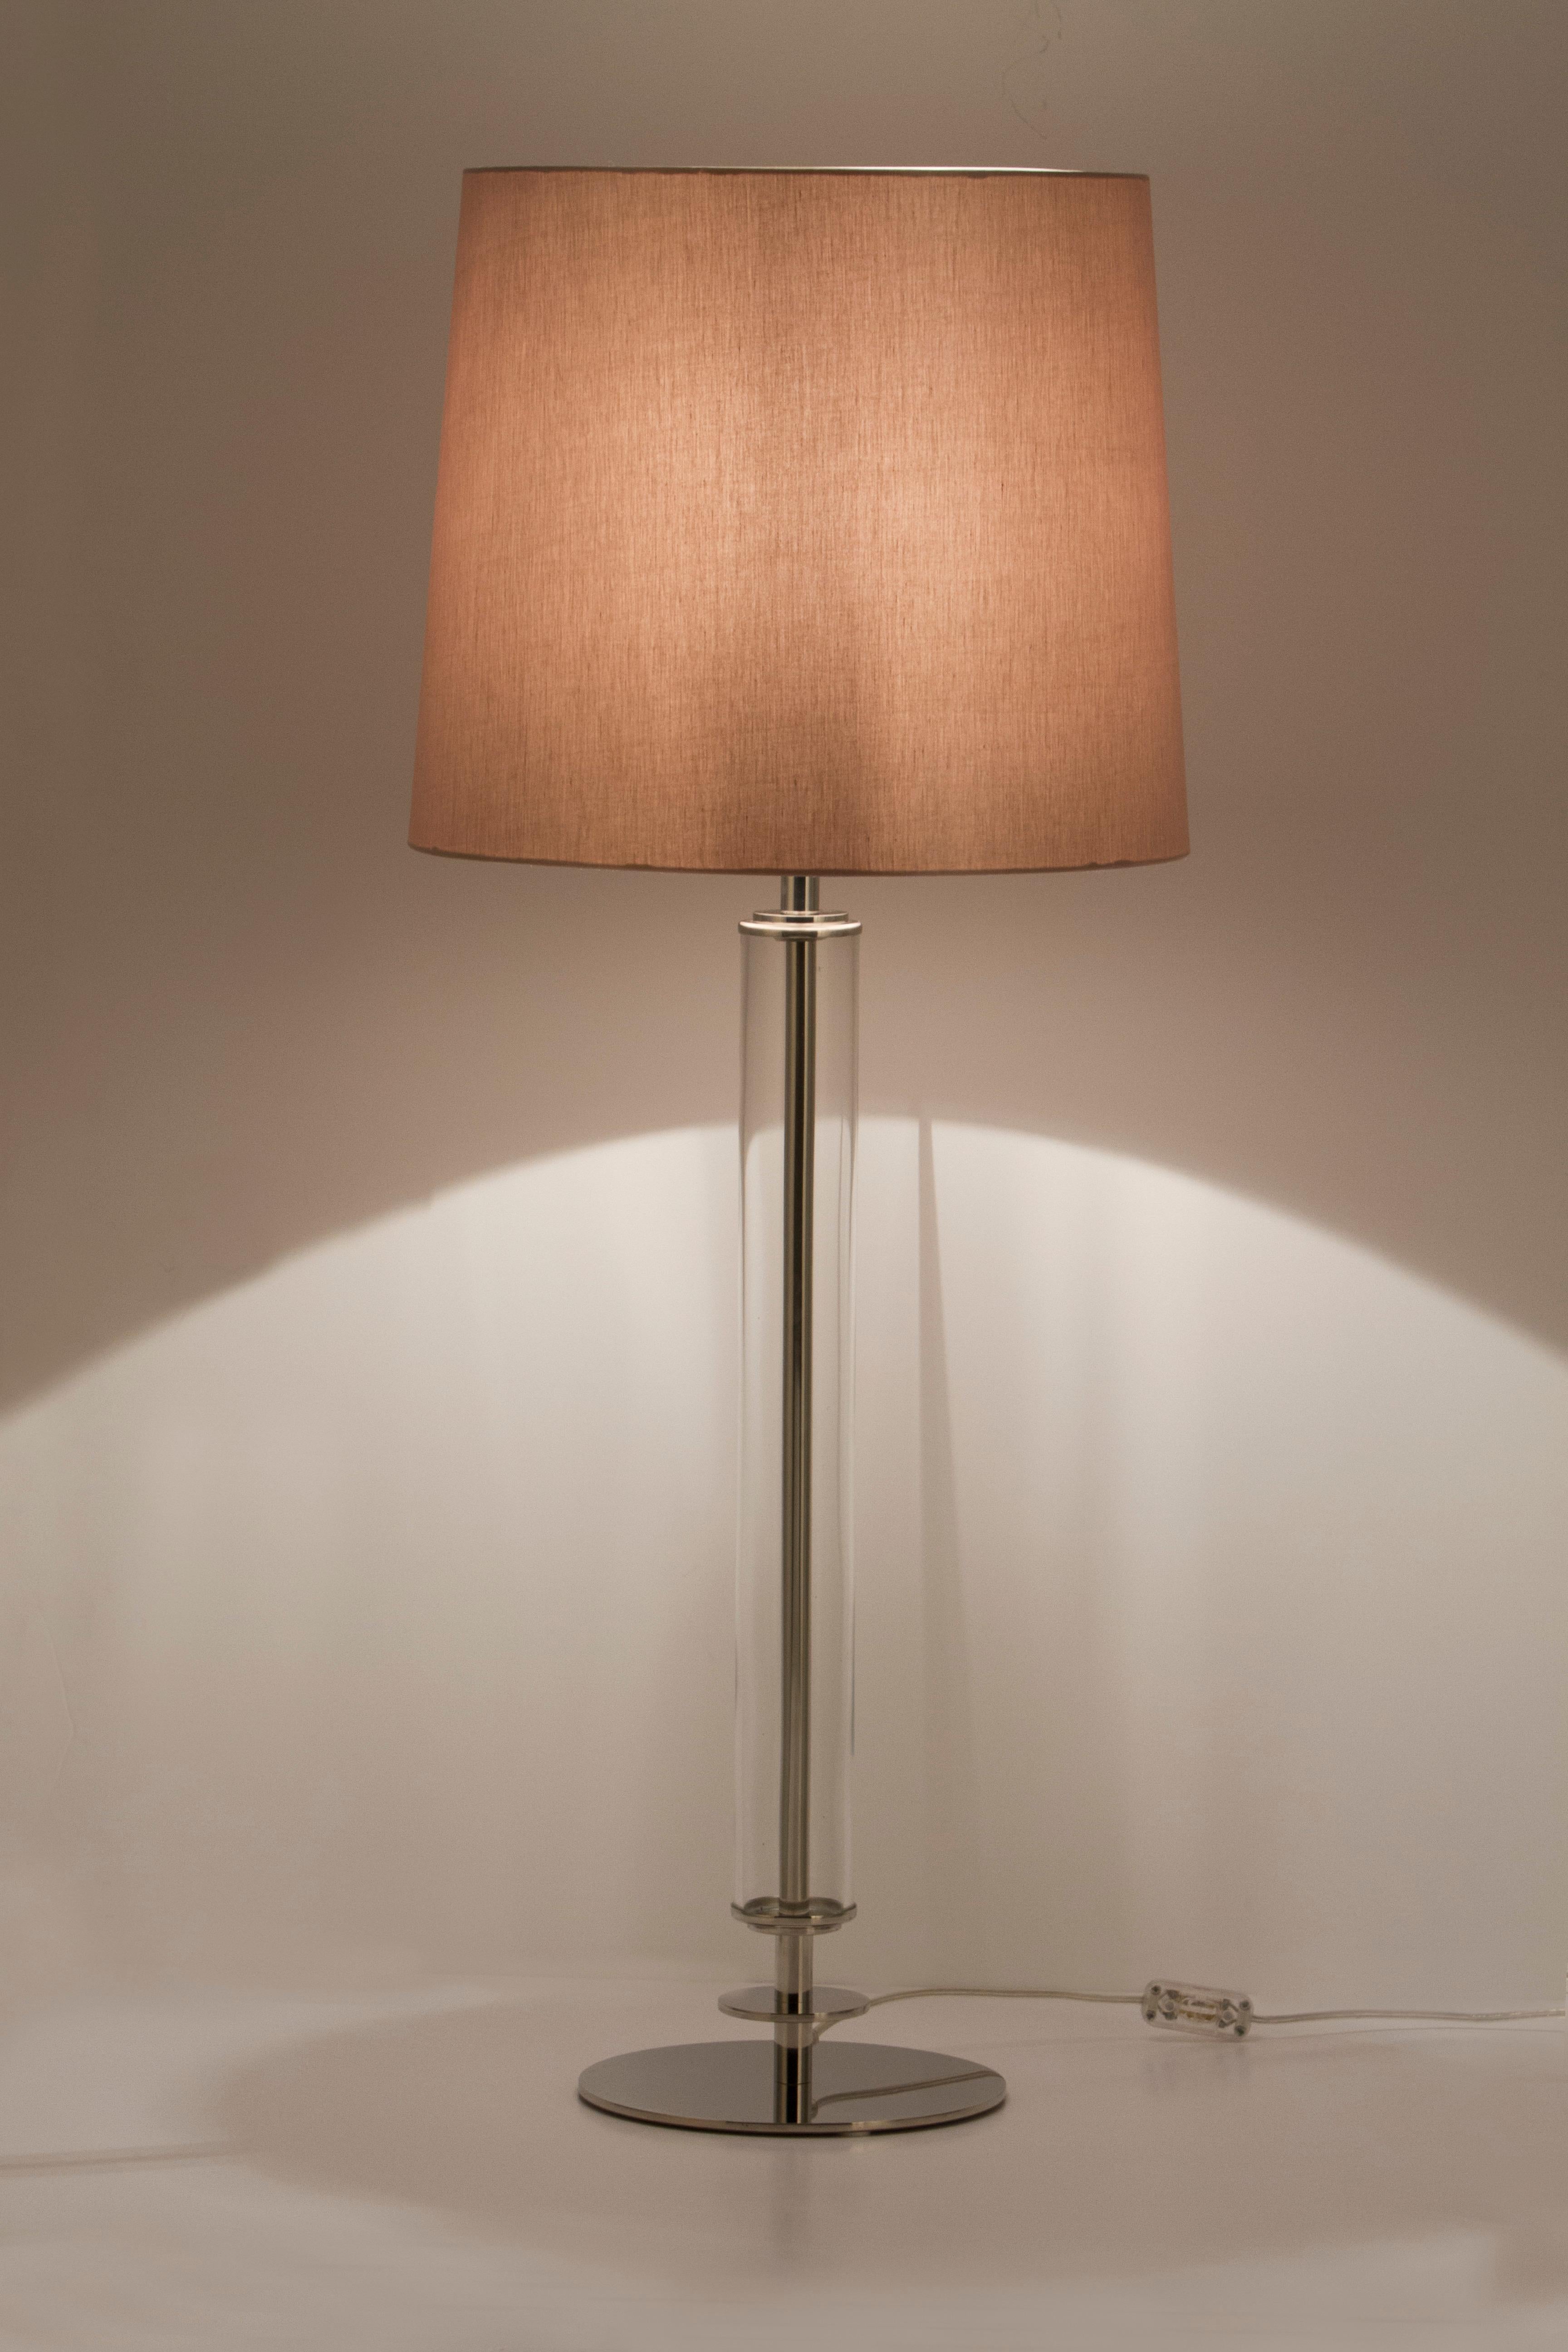 pink lampshade for table lamp